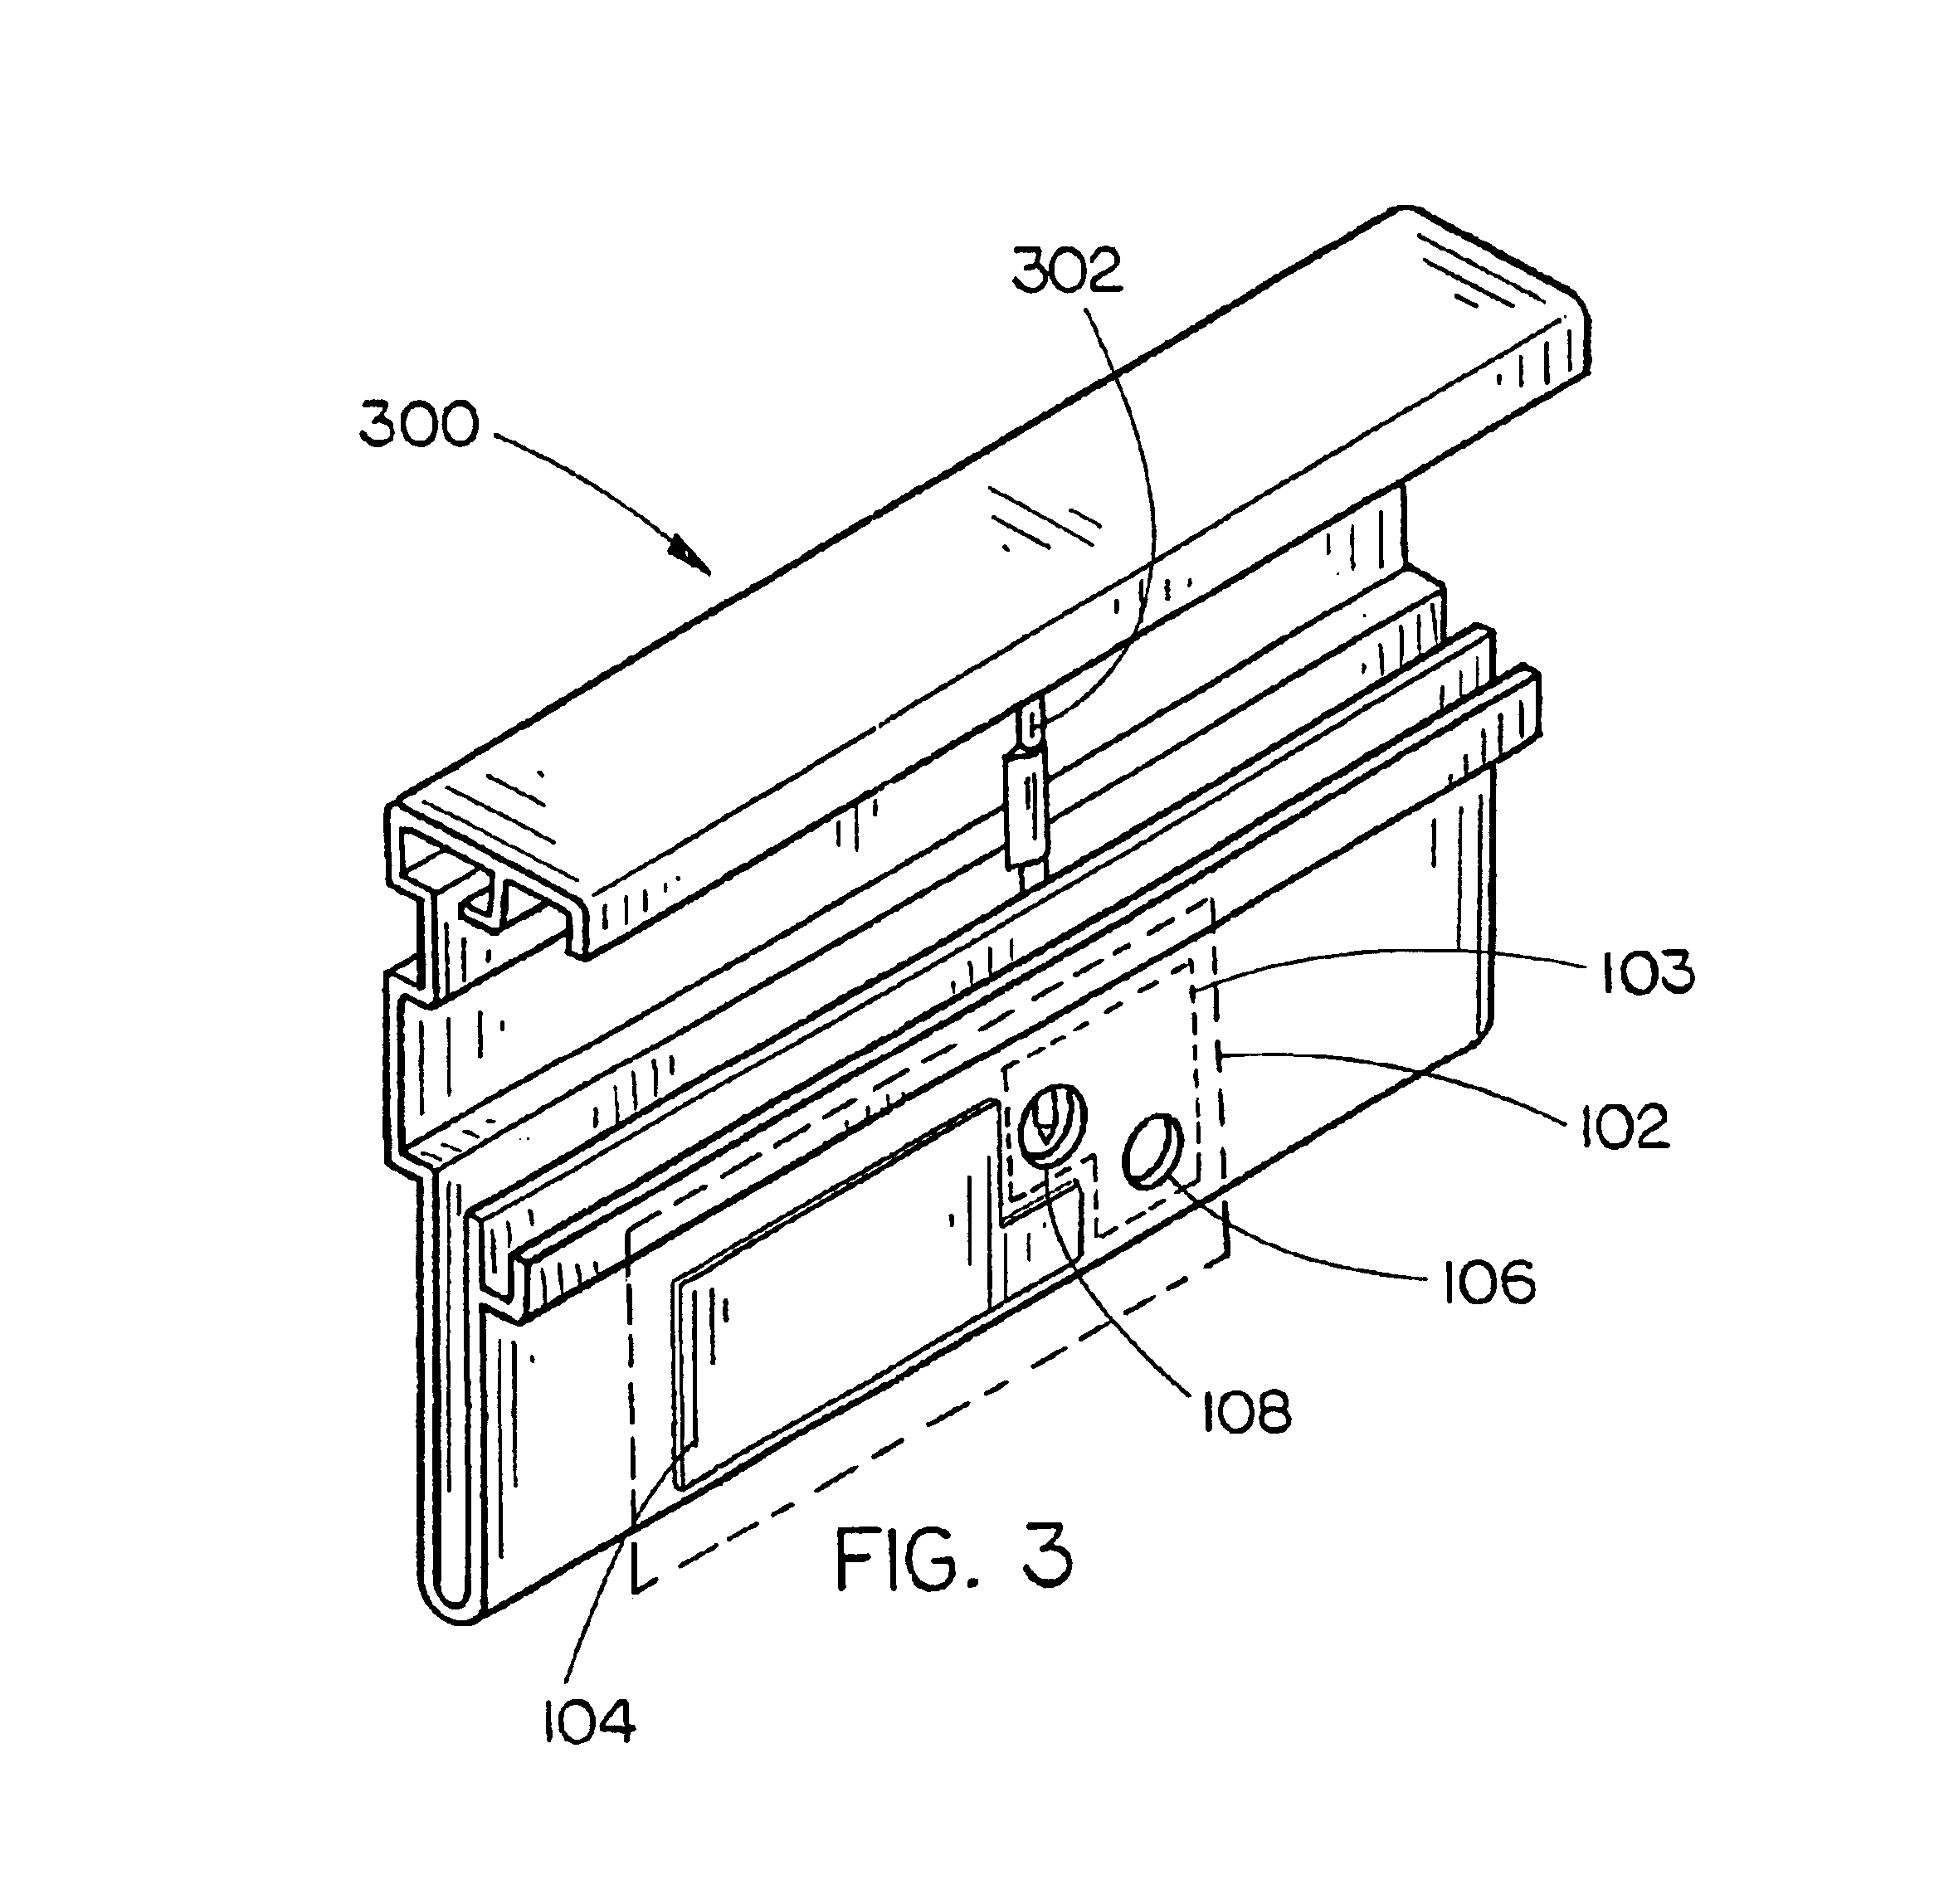 Apparatus and method to indicate required compressor pressure for use with pneumatic tool device